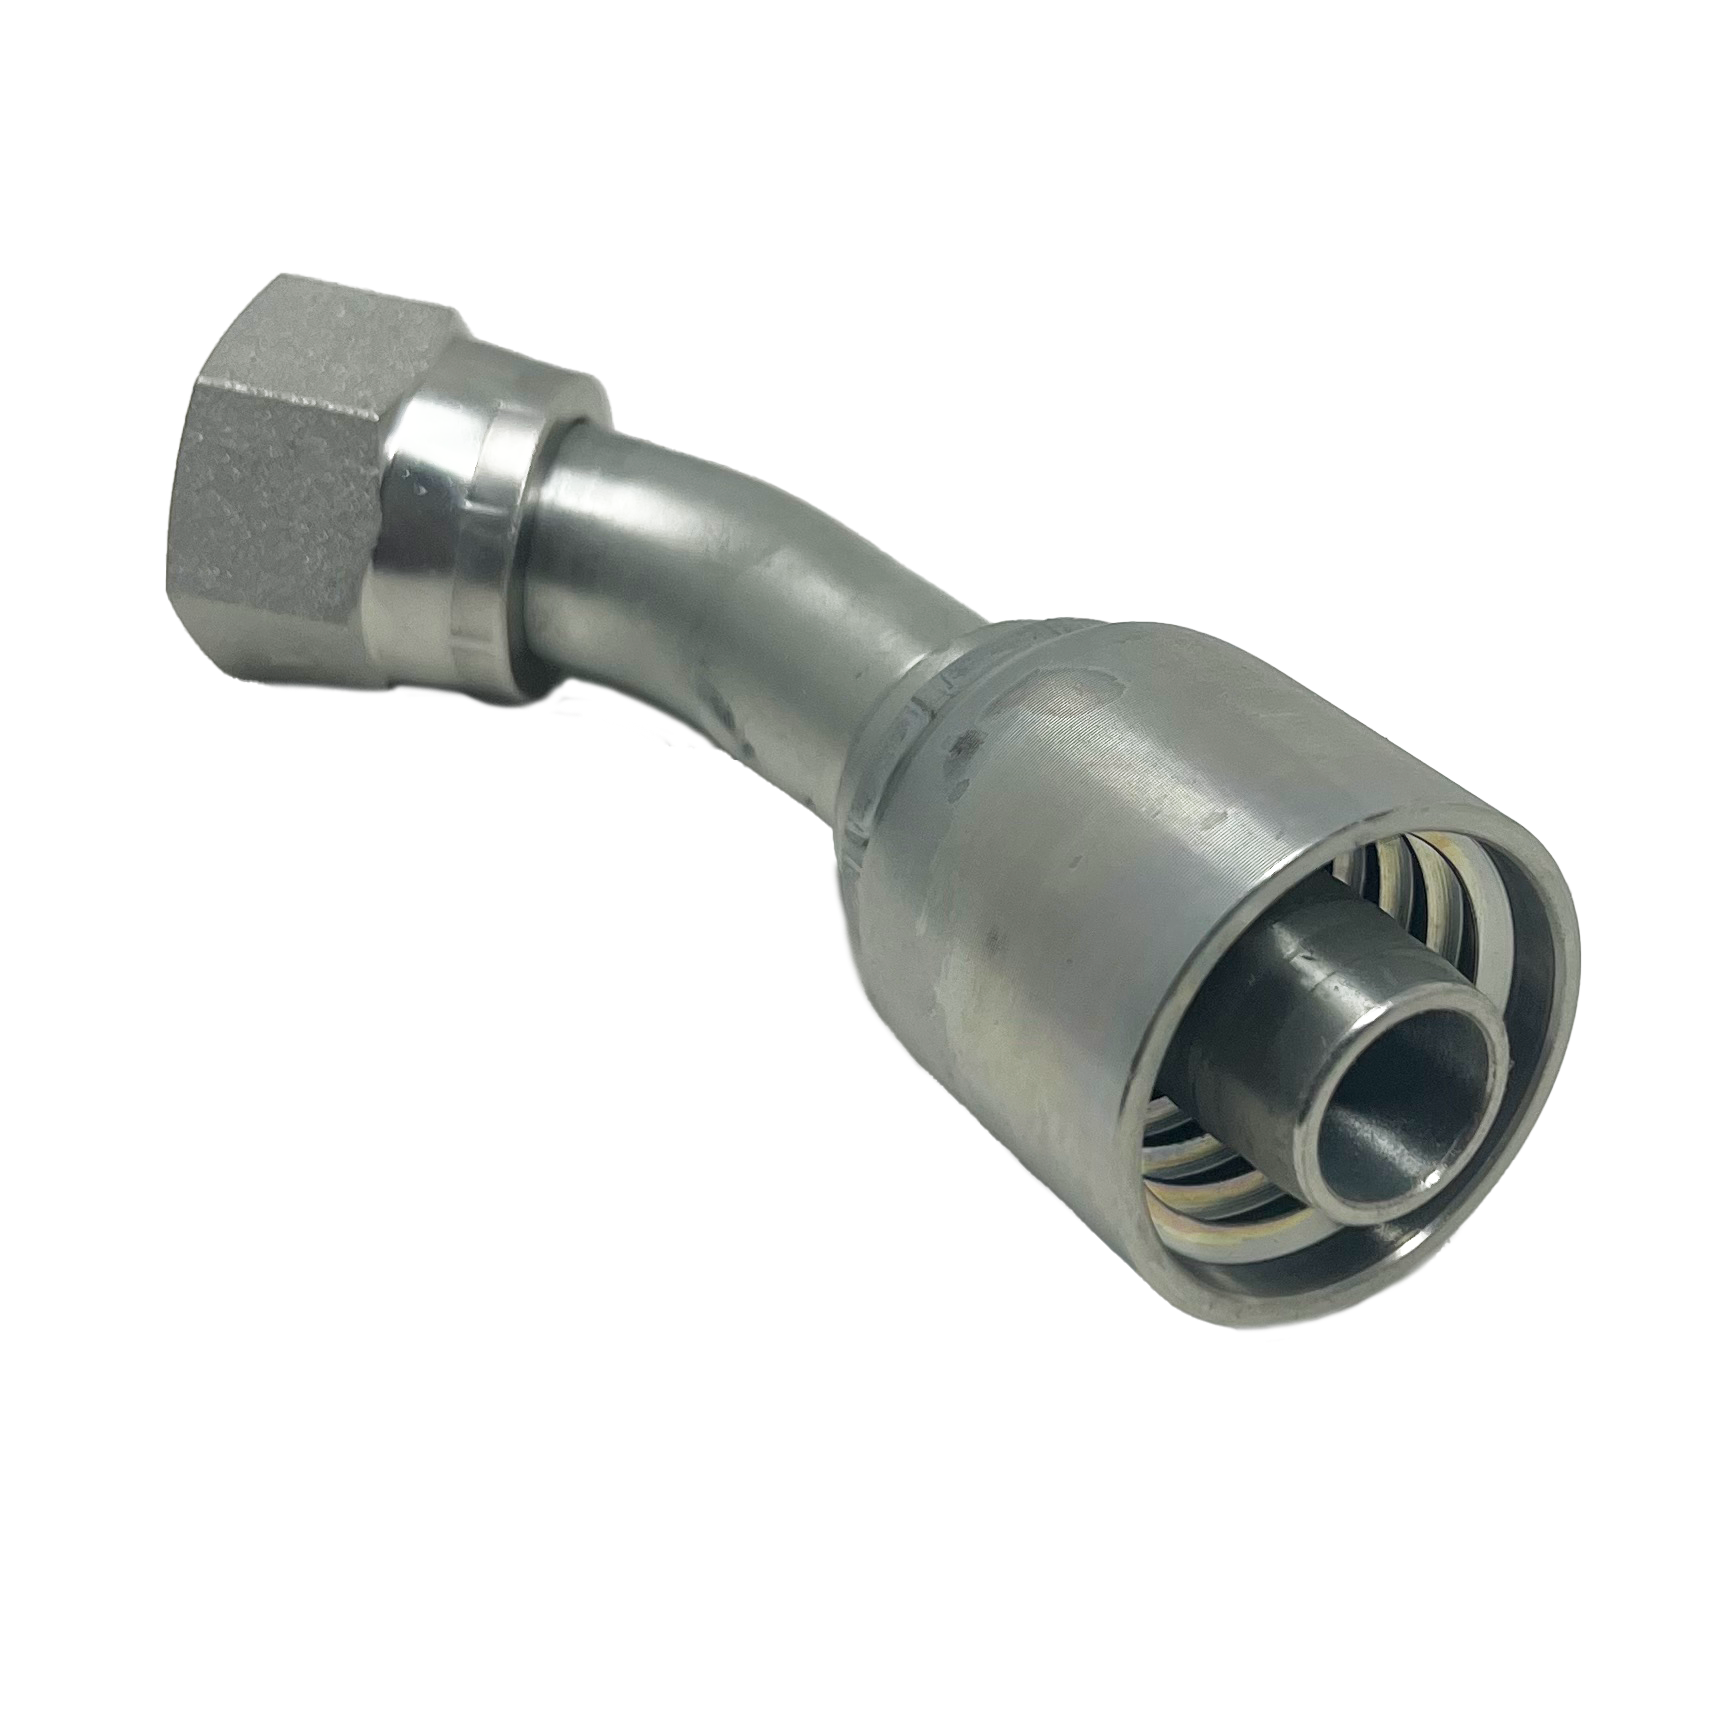 B2-JCFX45-1216: Continental Hose Fitting, 0.75 (3/4") Hose ID x 1-5/16-12           Female JIC, 45-Degree Swivel Connection